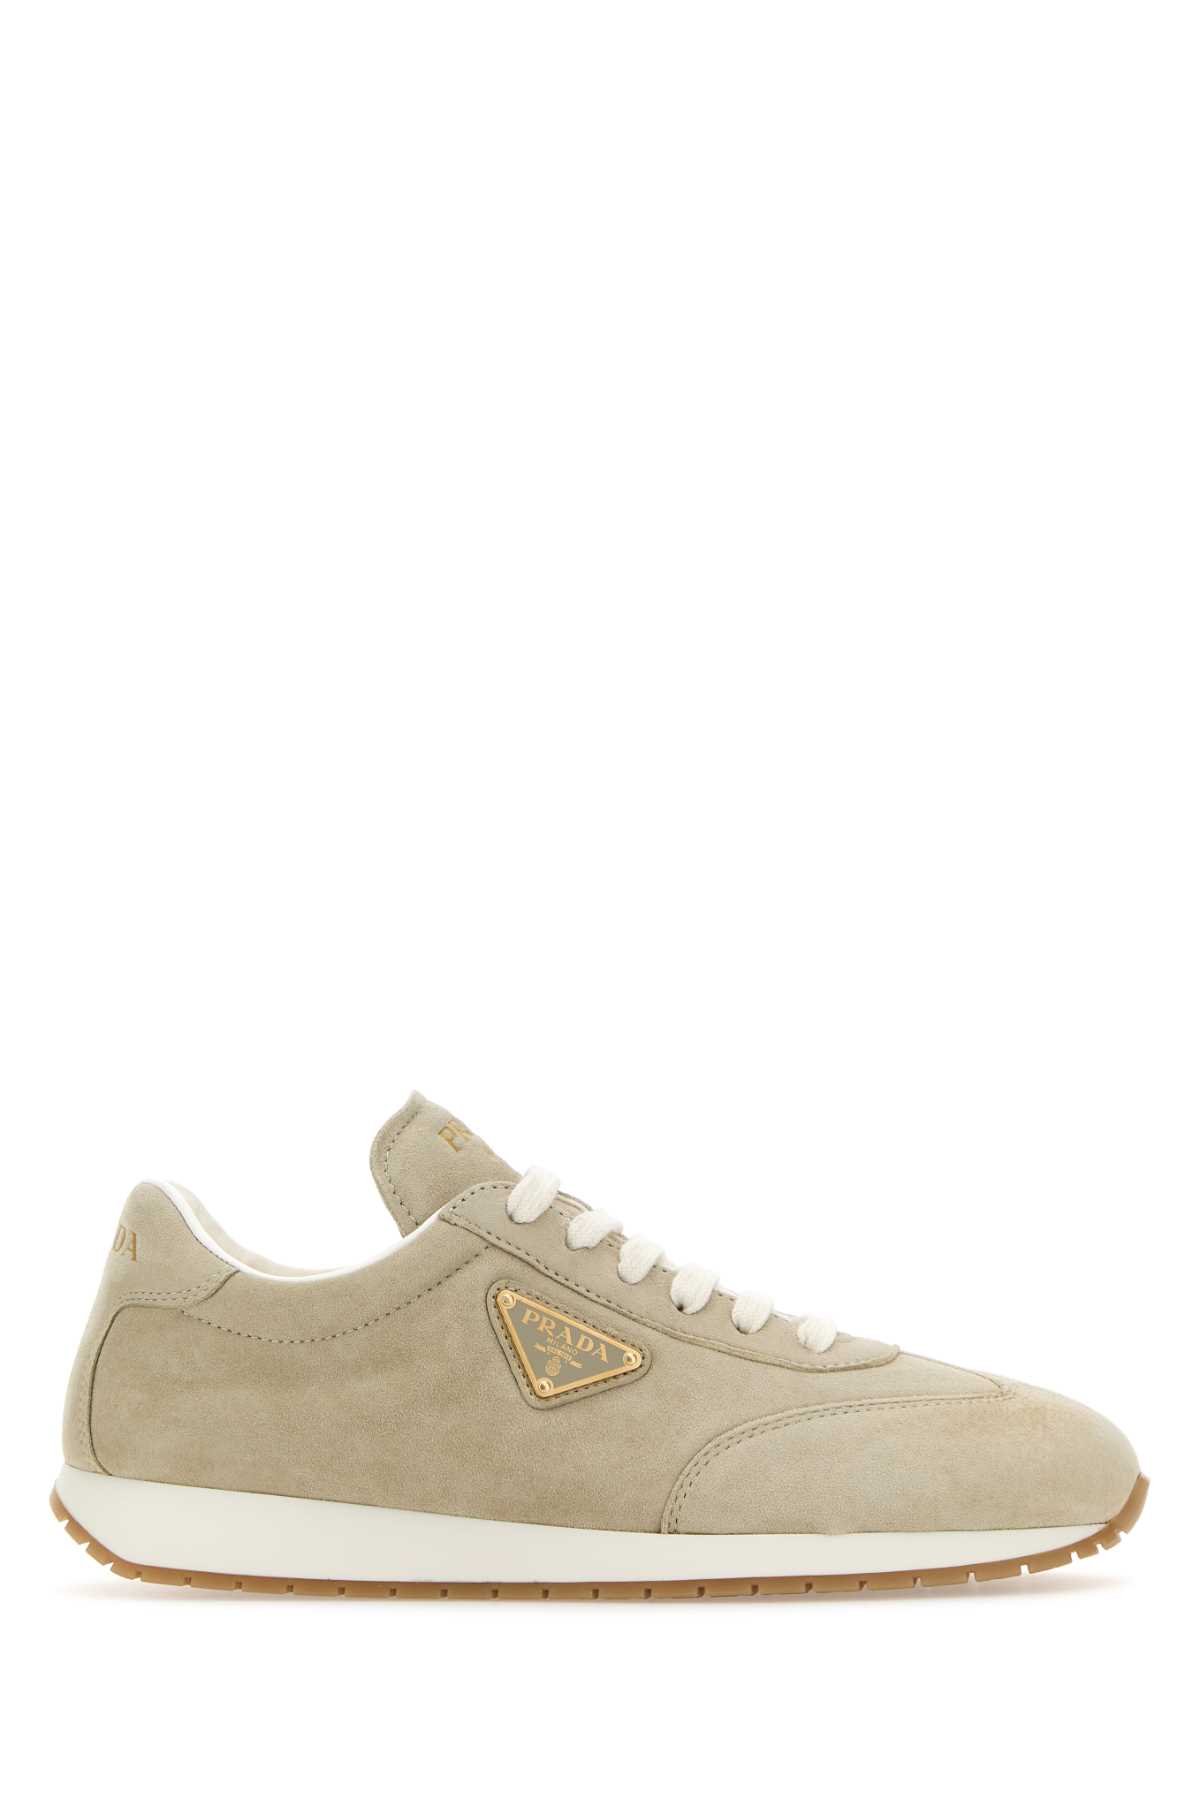 Sand Suede Sneakers